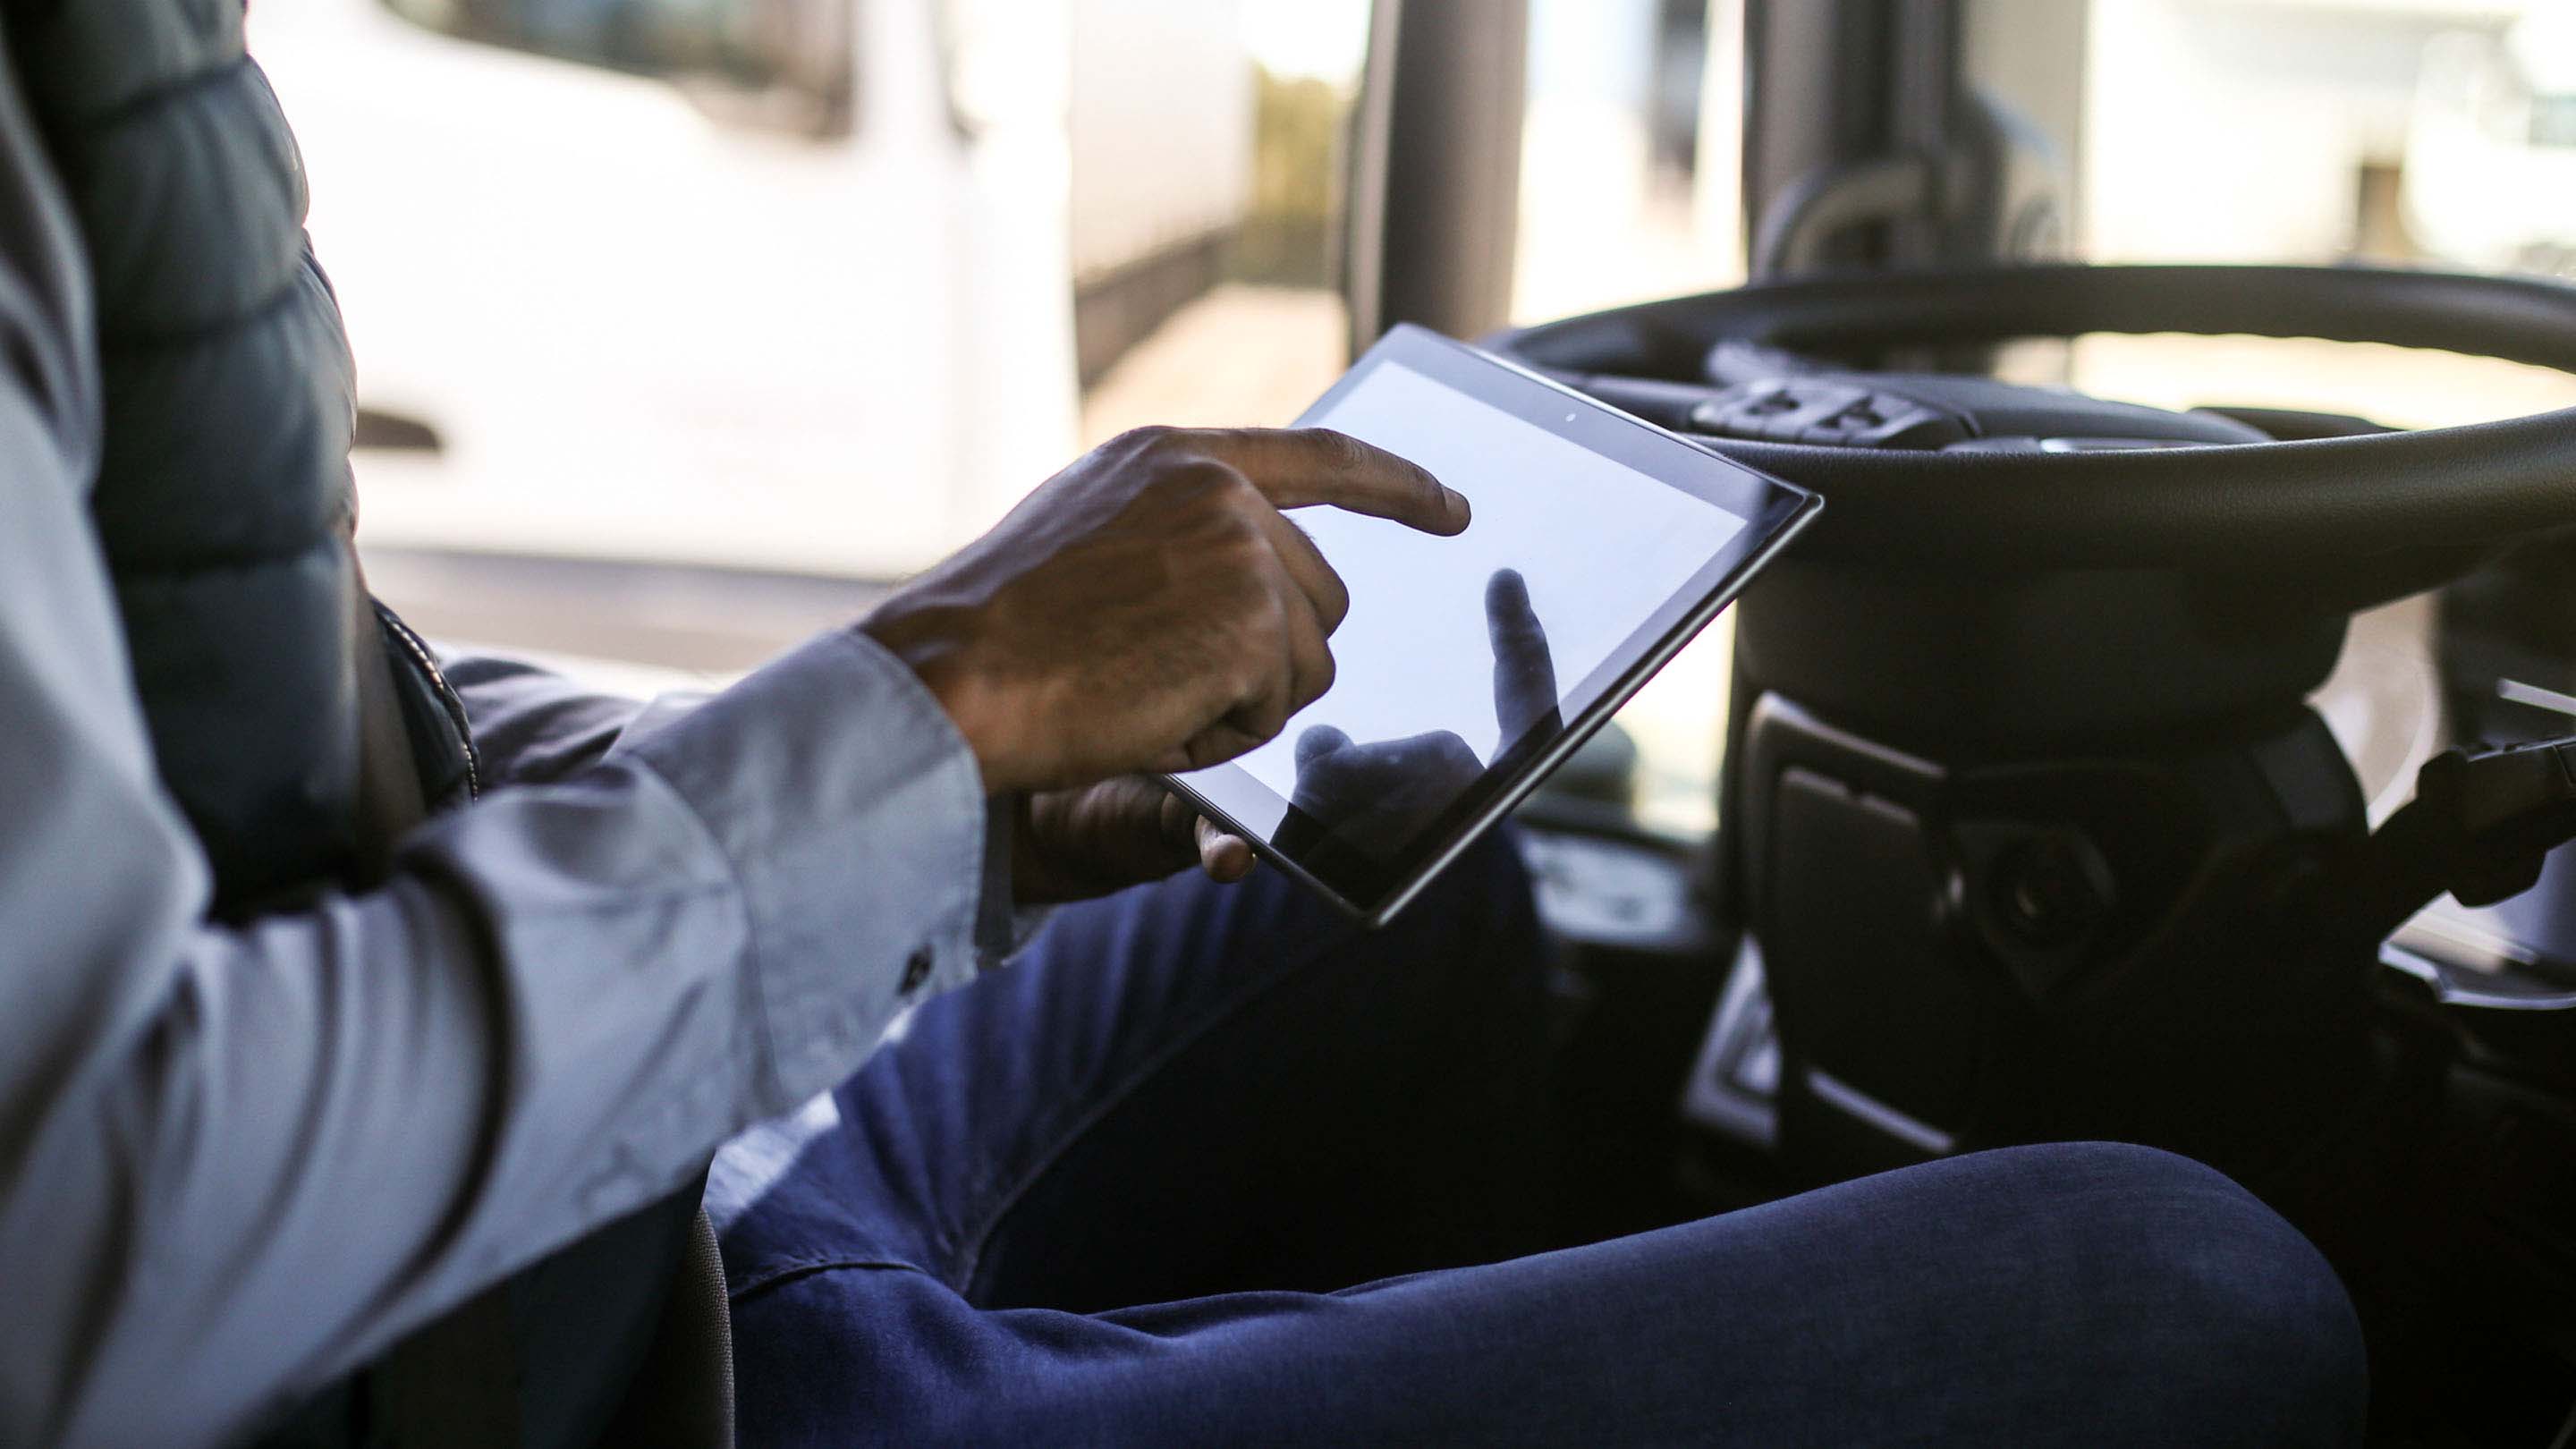 Driver reviewing Hours of Service rules on a tablet in their vehicle